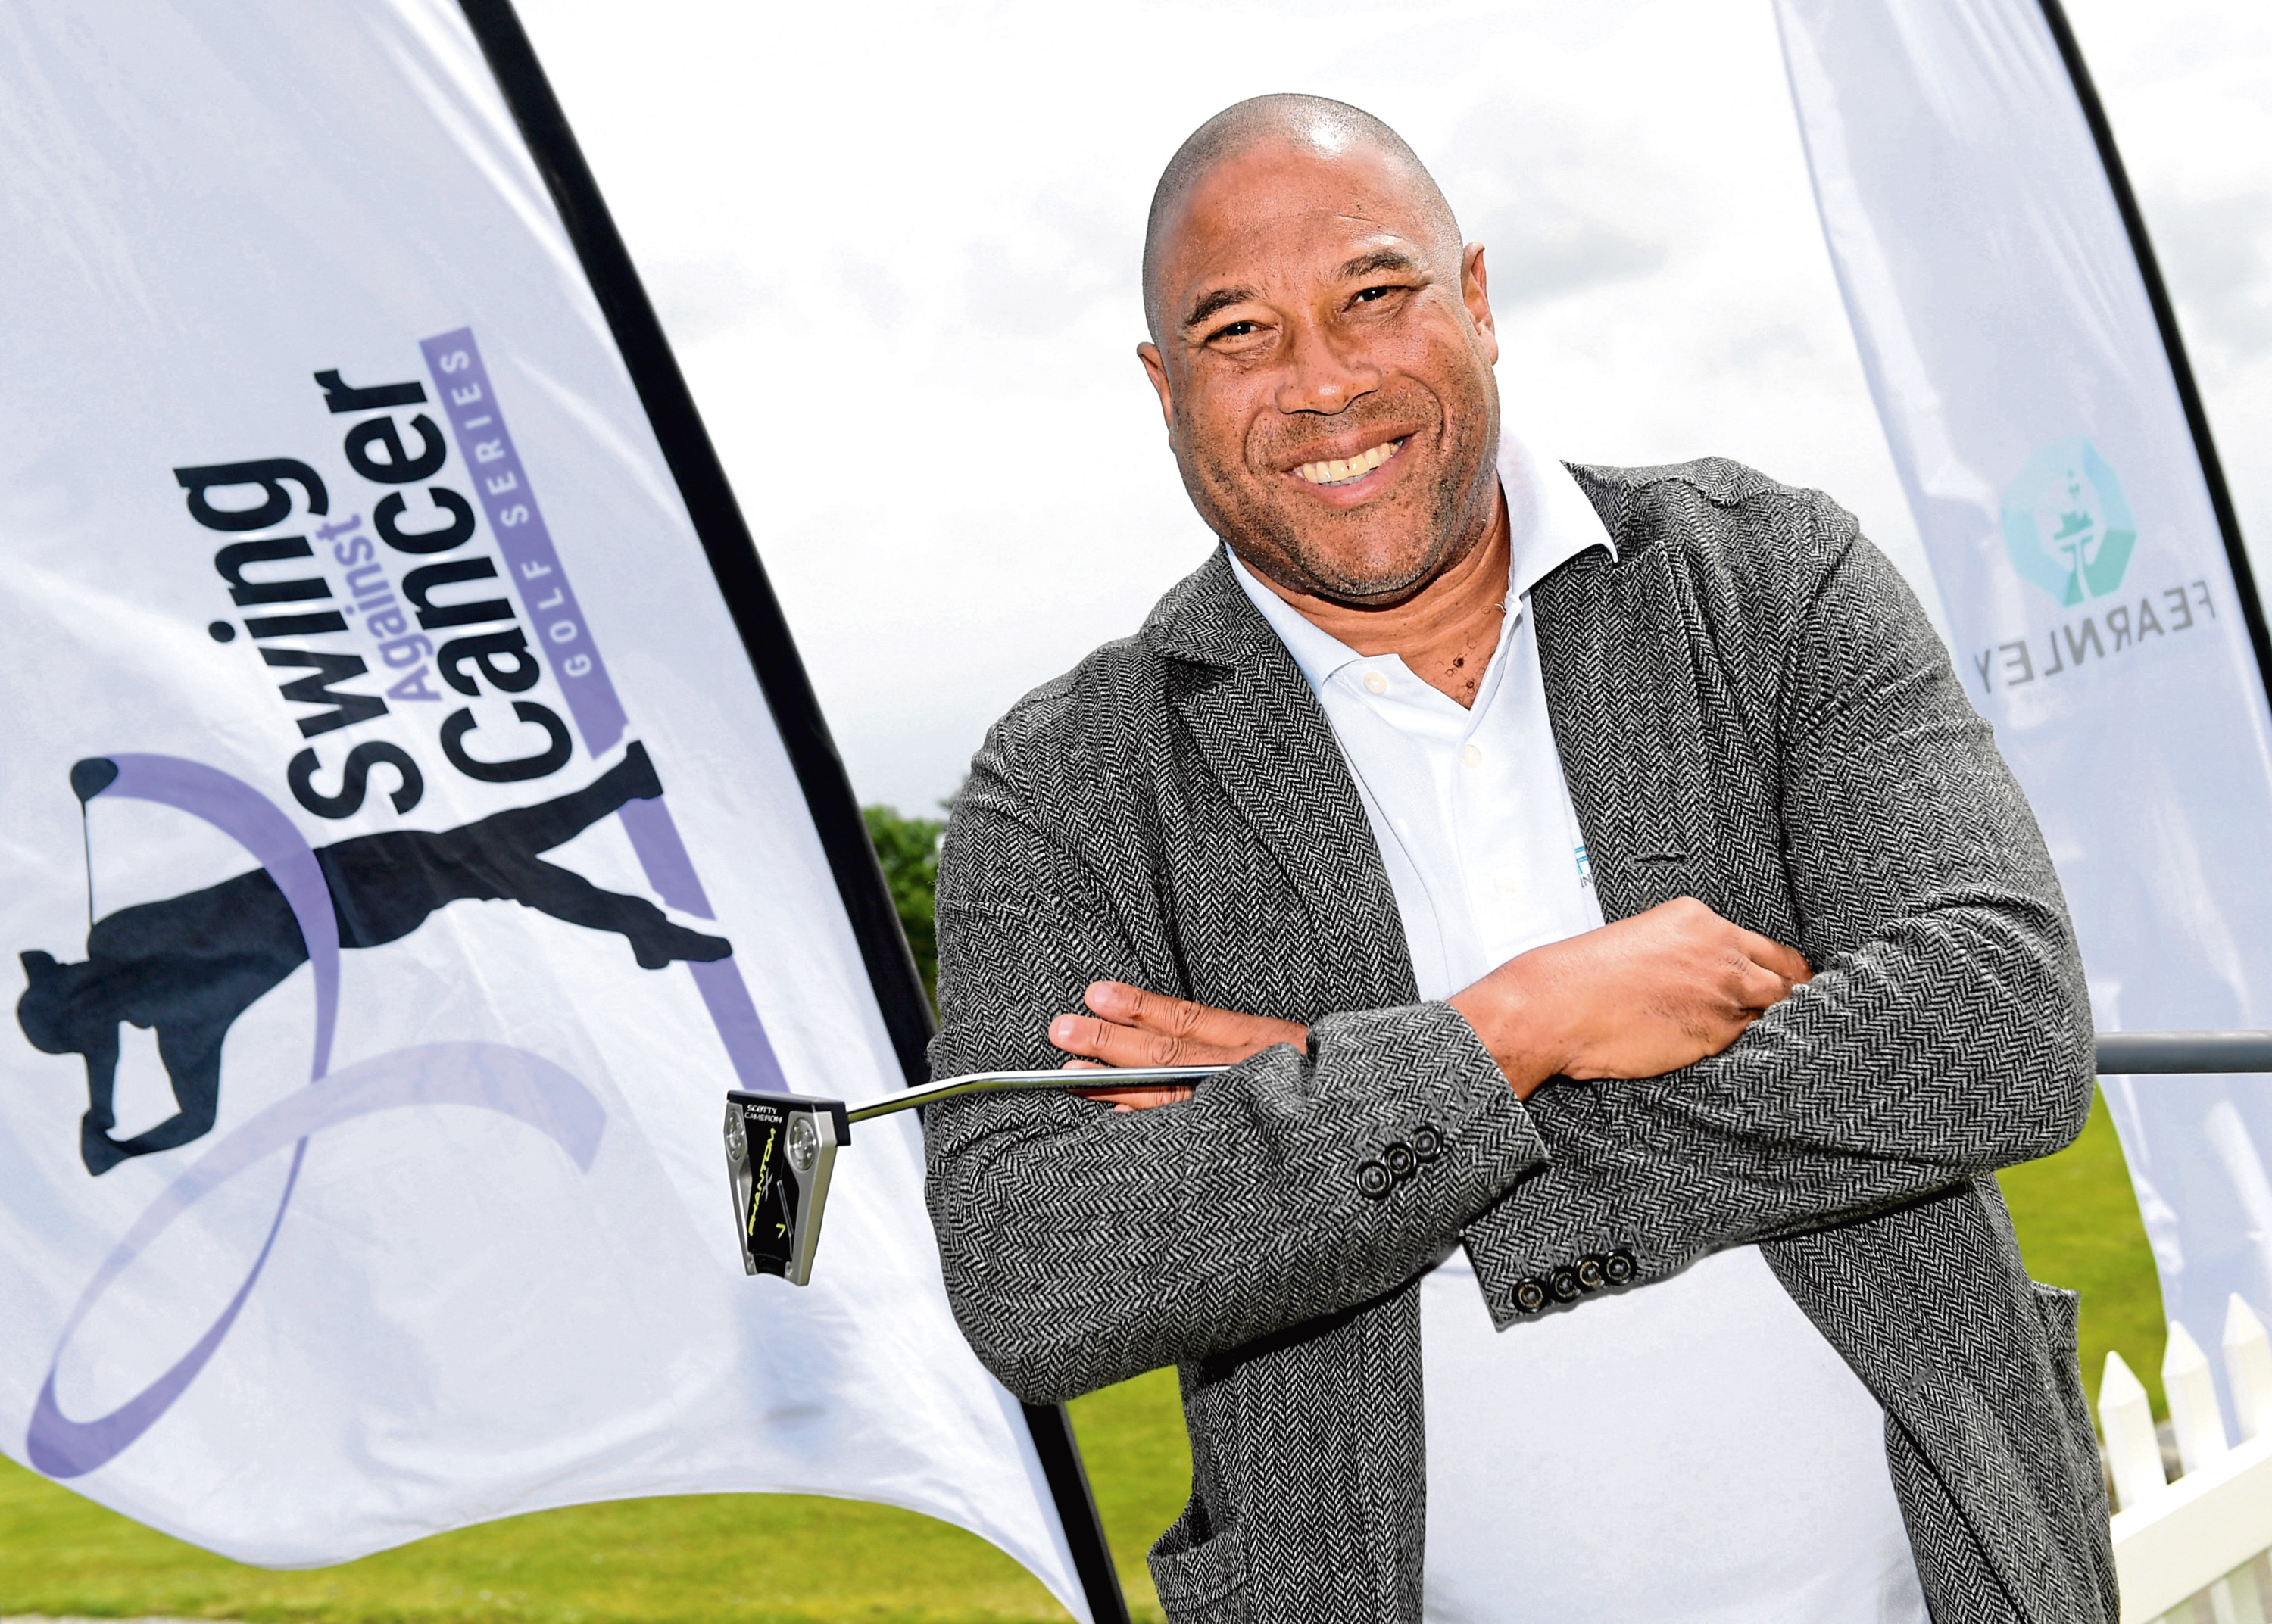 Newmachar Golf Course. Liverpool and England football legend John Barnes who is participating in a charity golf event. CR0010544
14/06/19
Picture by KATH FLANNERY